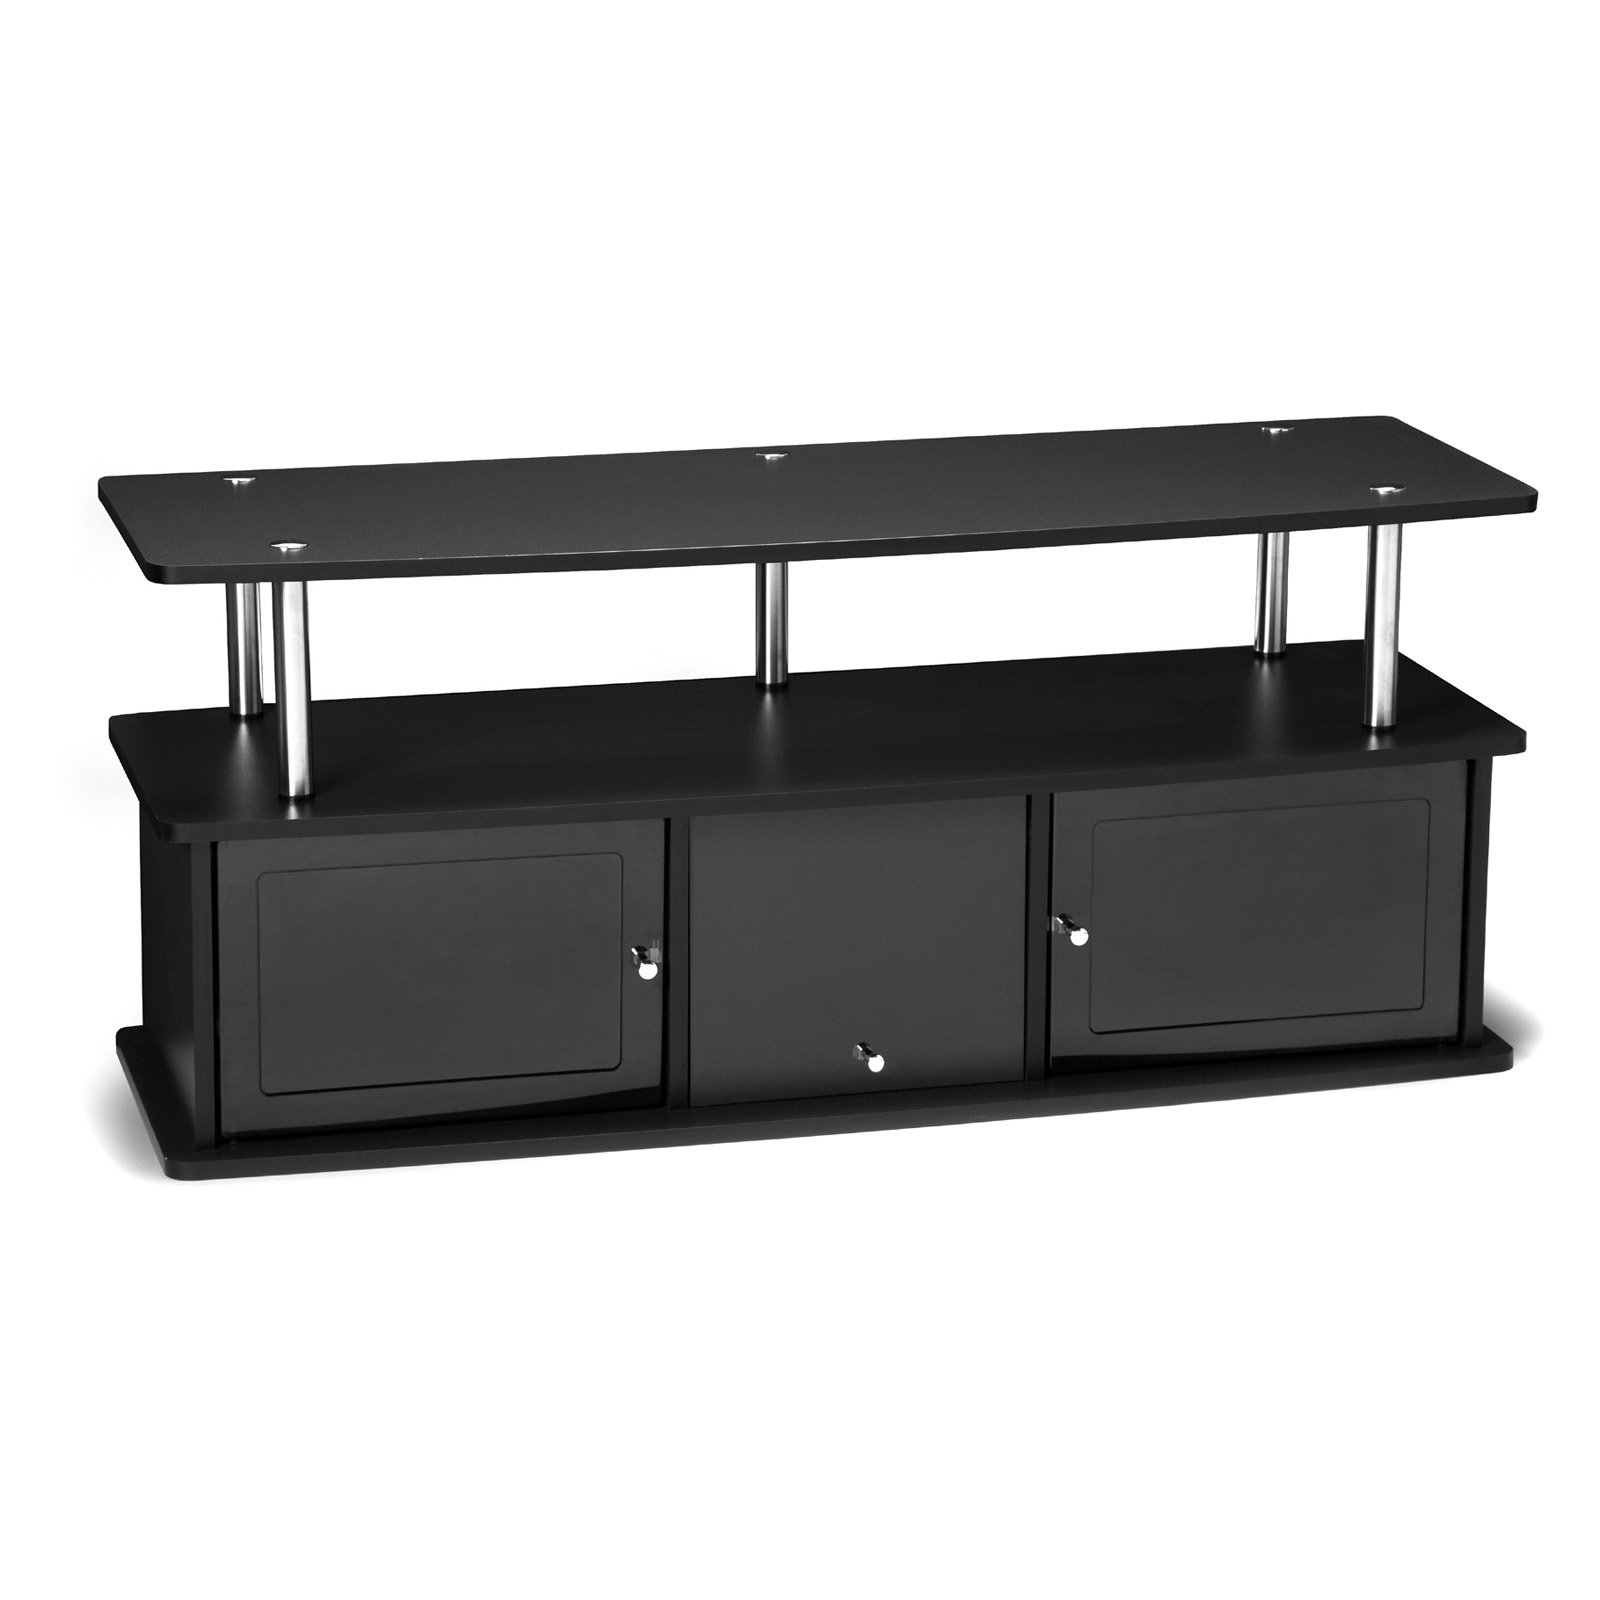 Convenience Concepts Designs2Go Cherry TV Stand with 3 Cabinets for TVs up to 50", Black - image 4 of 5